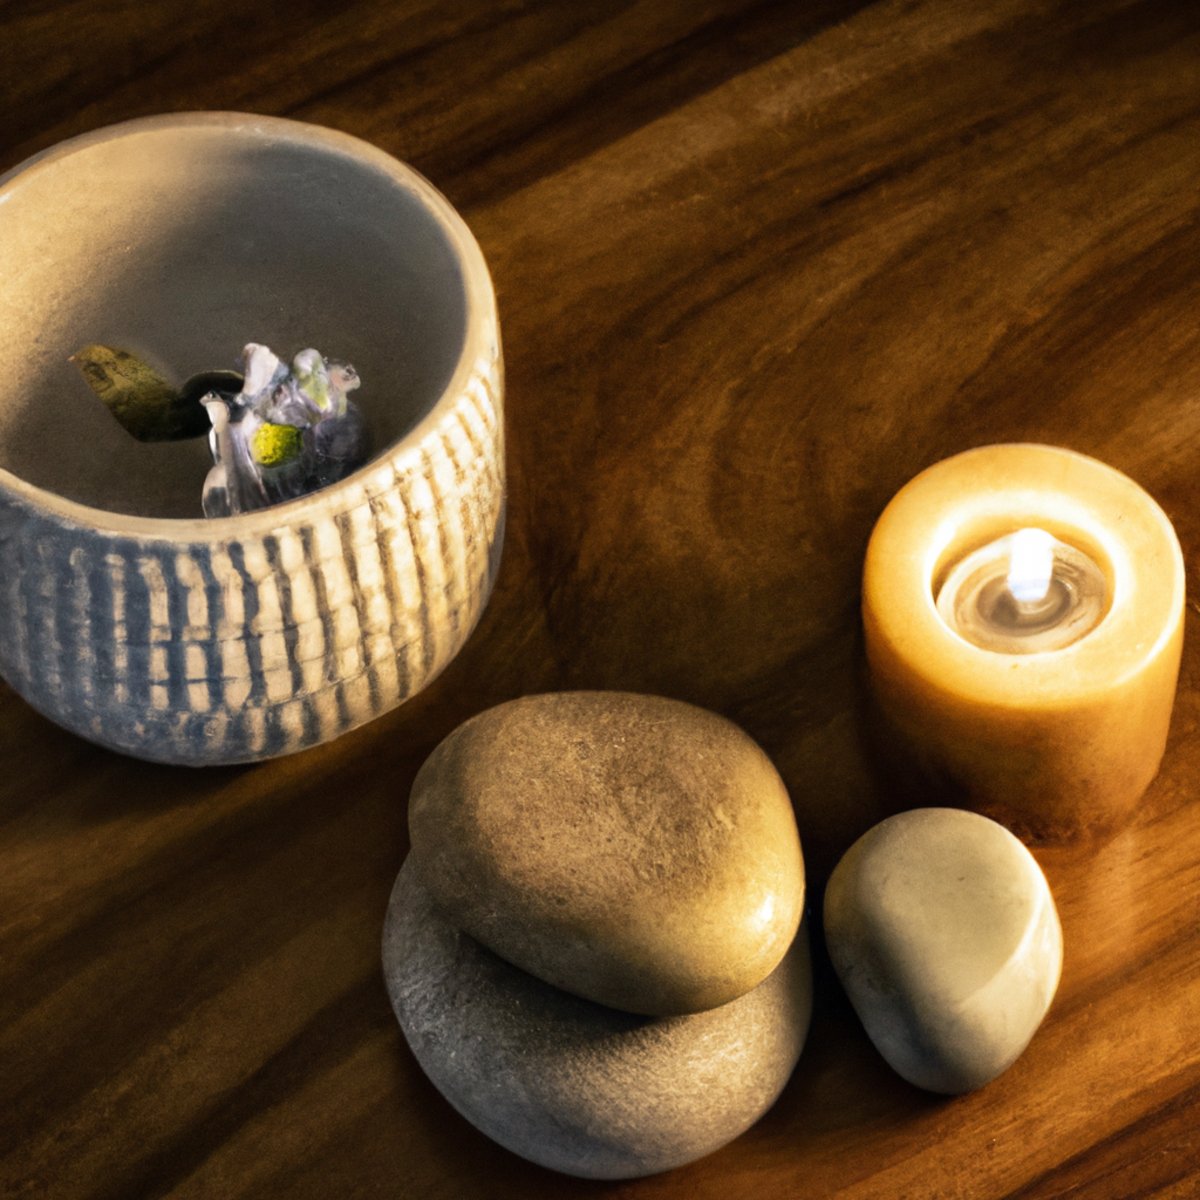 The photo features a wooden table with a white ceramic bowl filled with smooth stones, a small vase with a single flower, and a lit candle. The objects are arranged in a calming and balanced manner, inviting the viewer to take a moment to pause and reflect. The soft lighting and natural textures of the objects create a peaceful atmosphere, perfectly complementing the article's focus on quick and easy meditation exercises for a busy lifestyle.